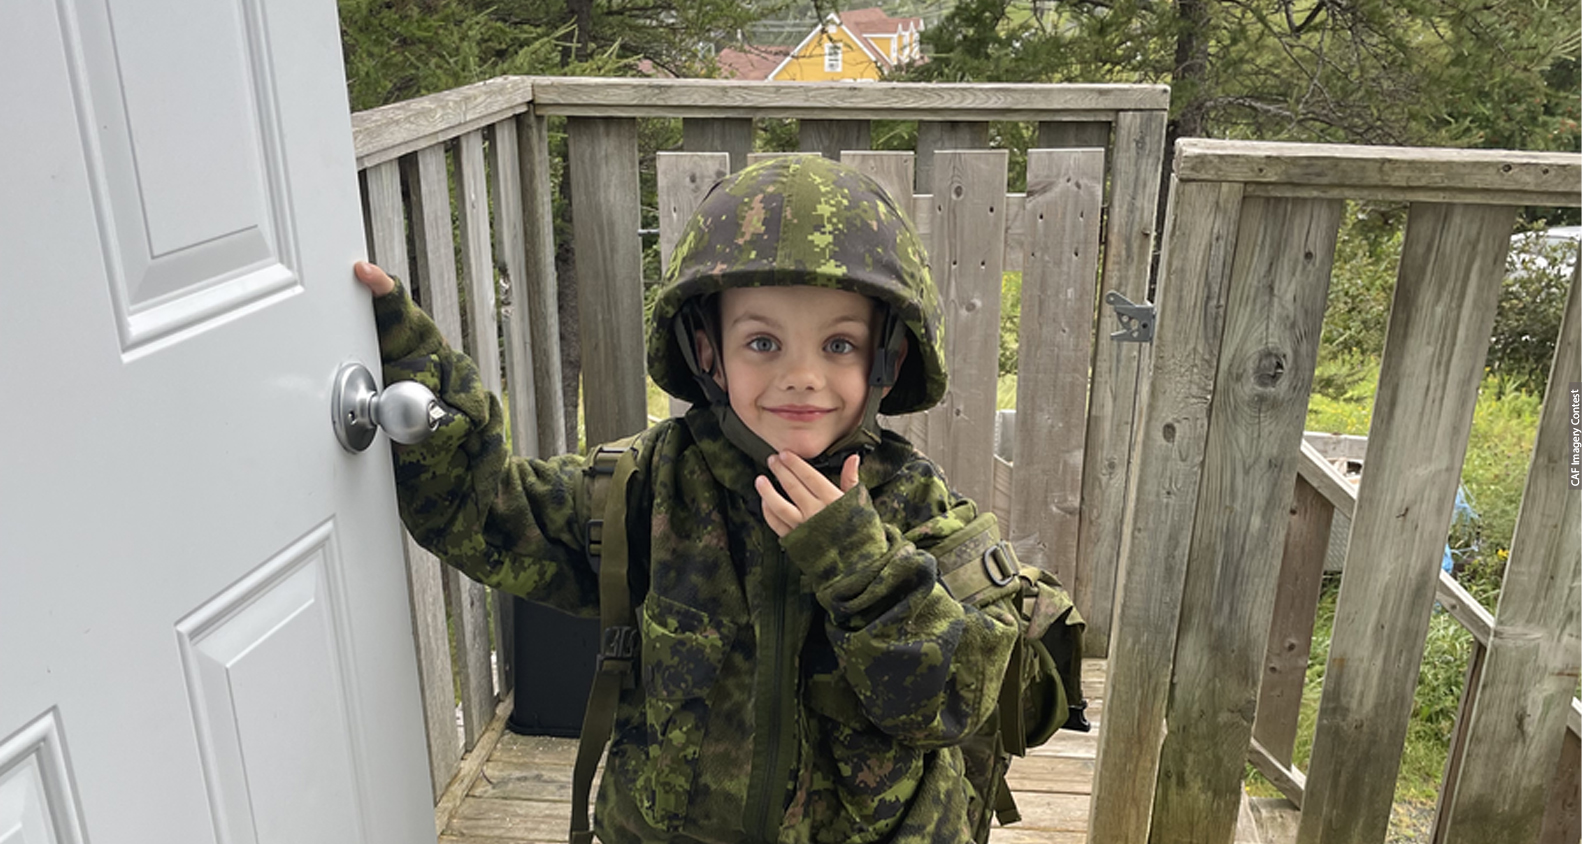 Boy dressed up as soldier